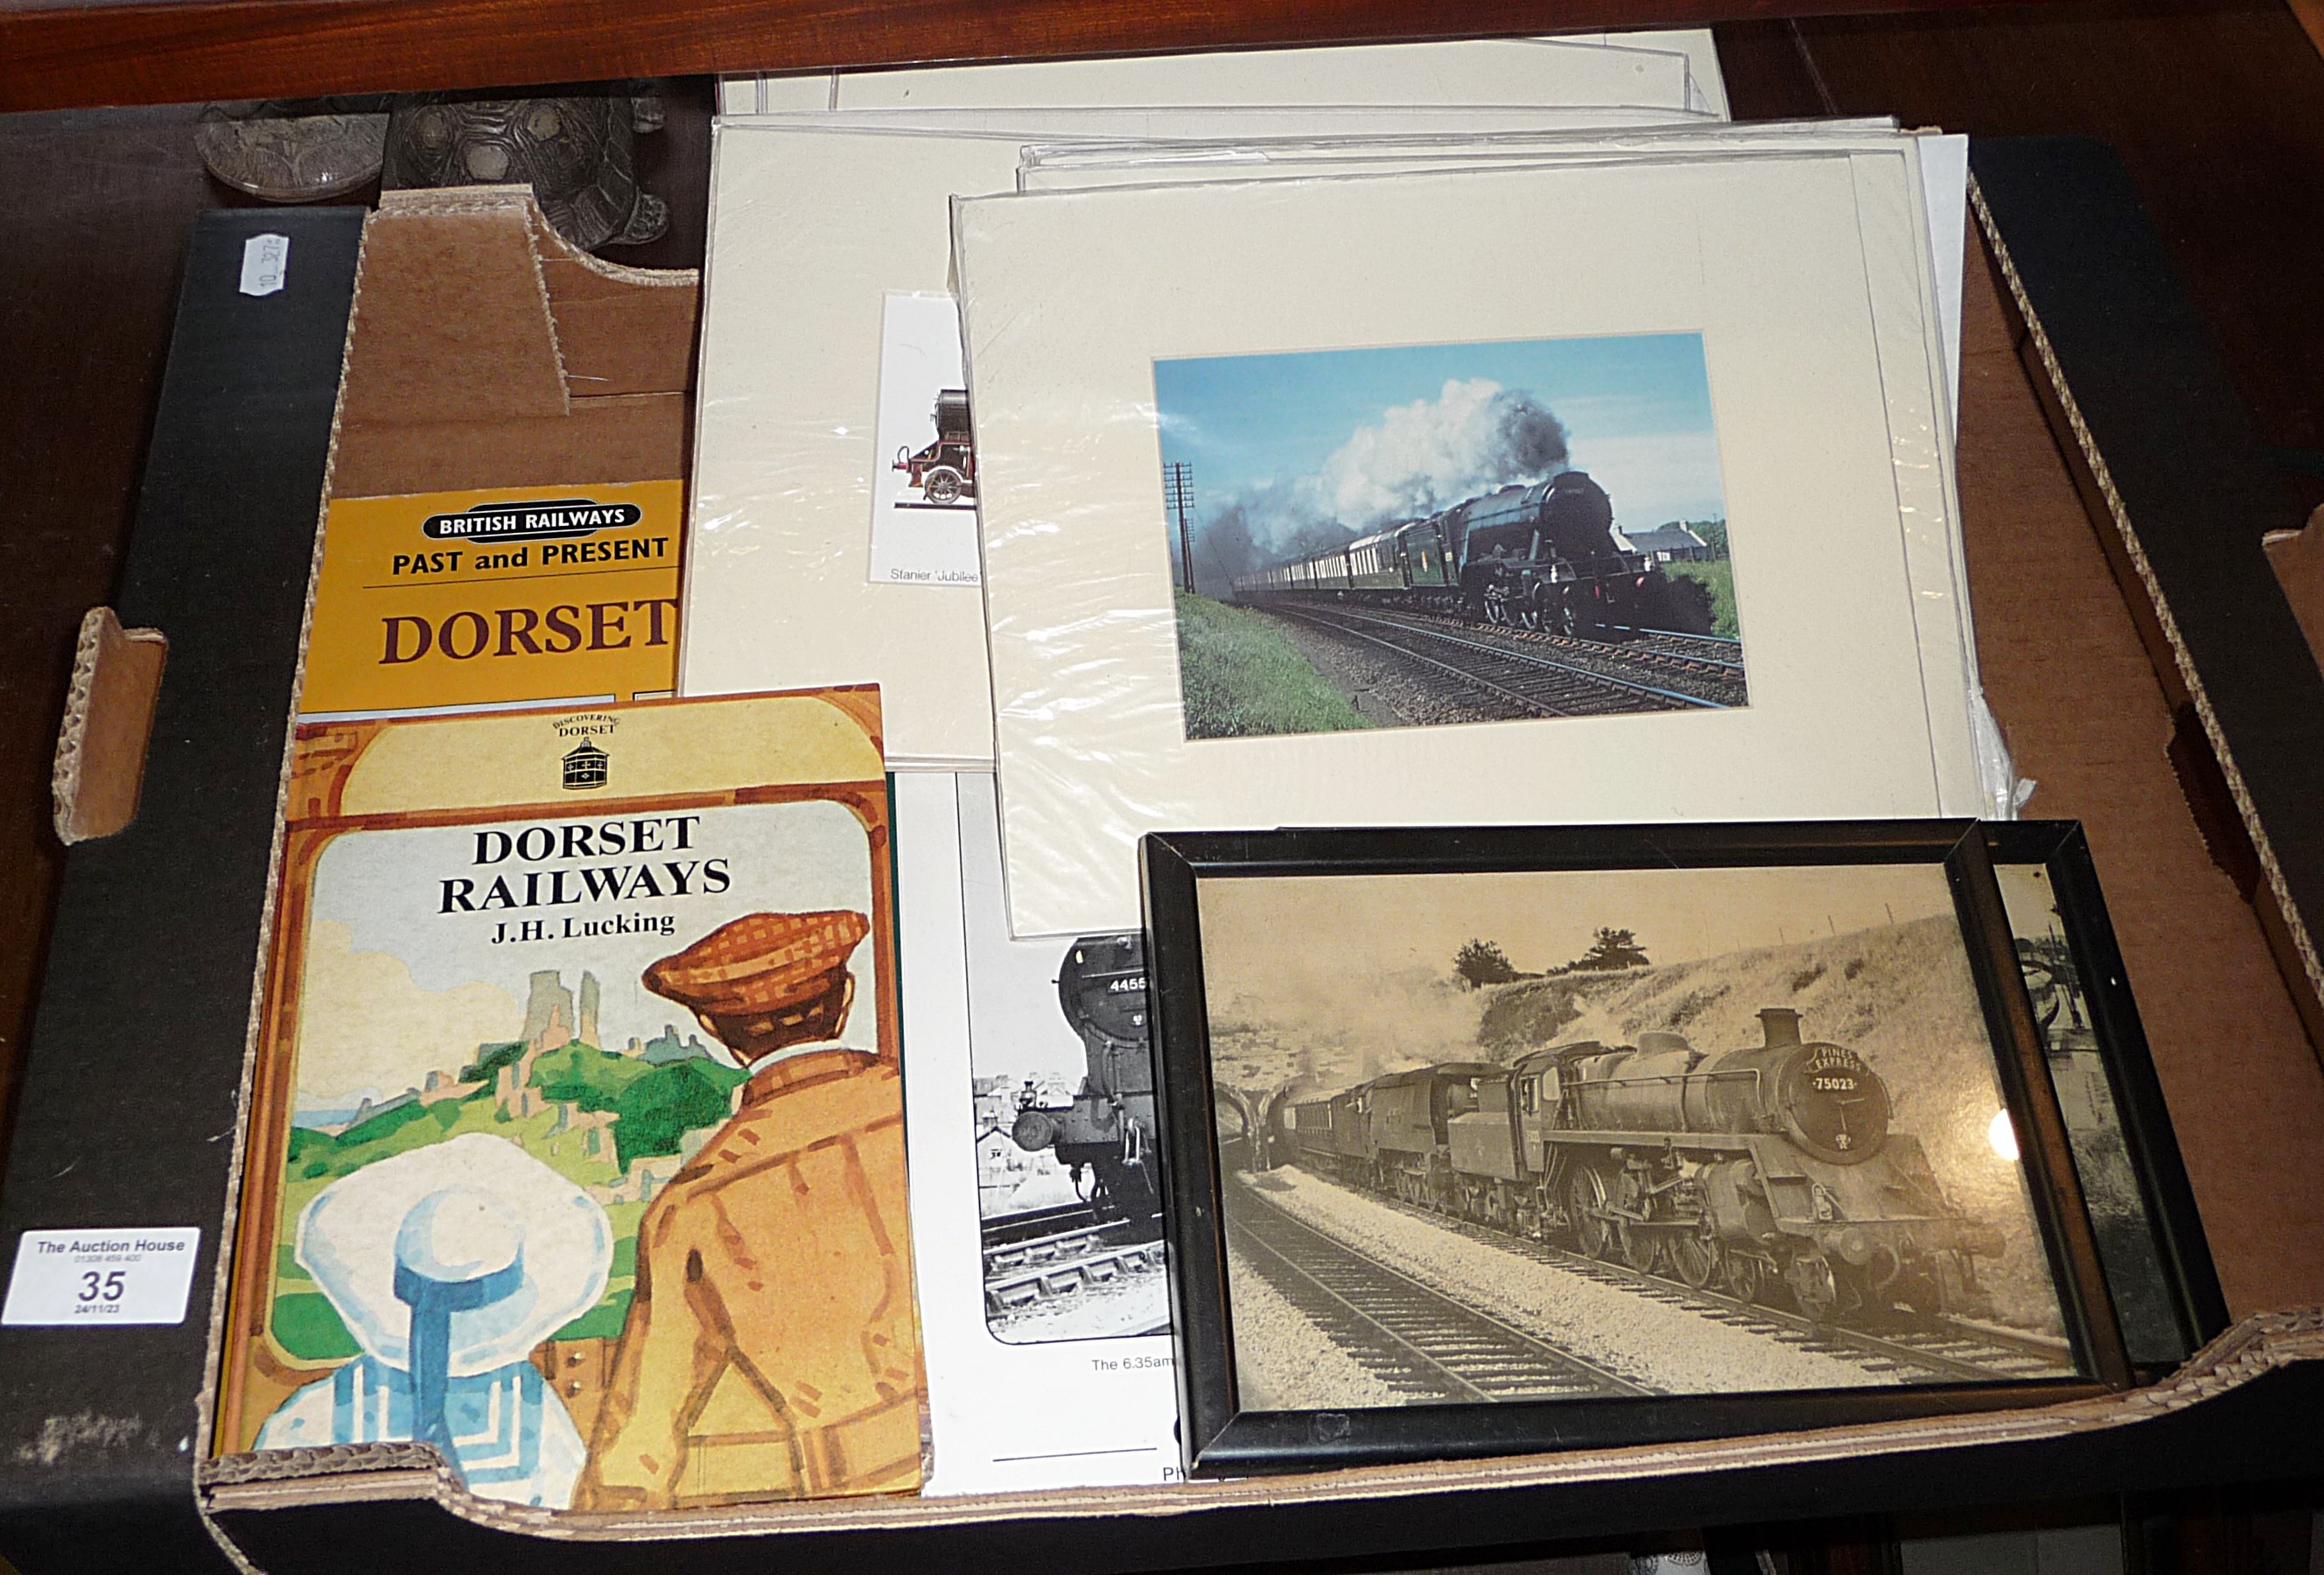 Assorted railway books and photographs of locomotives including "Dorset Railways" by J.H. Lucking